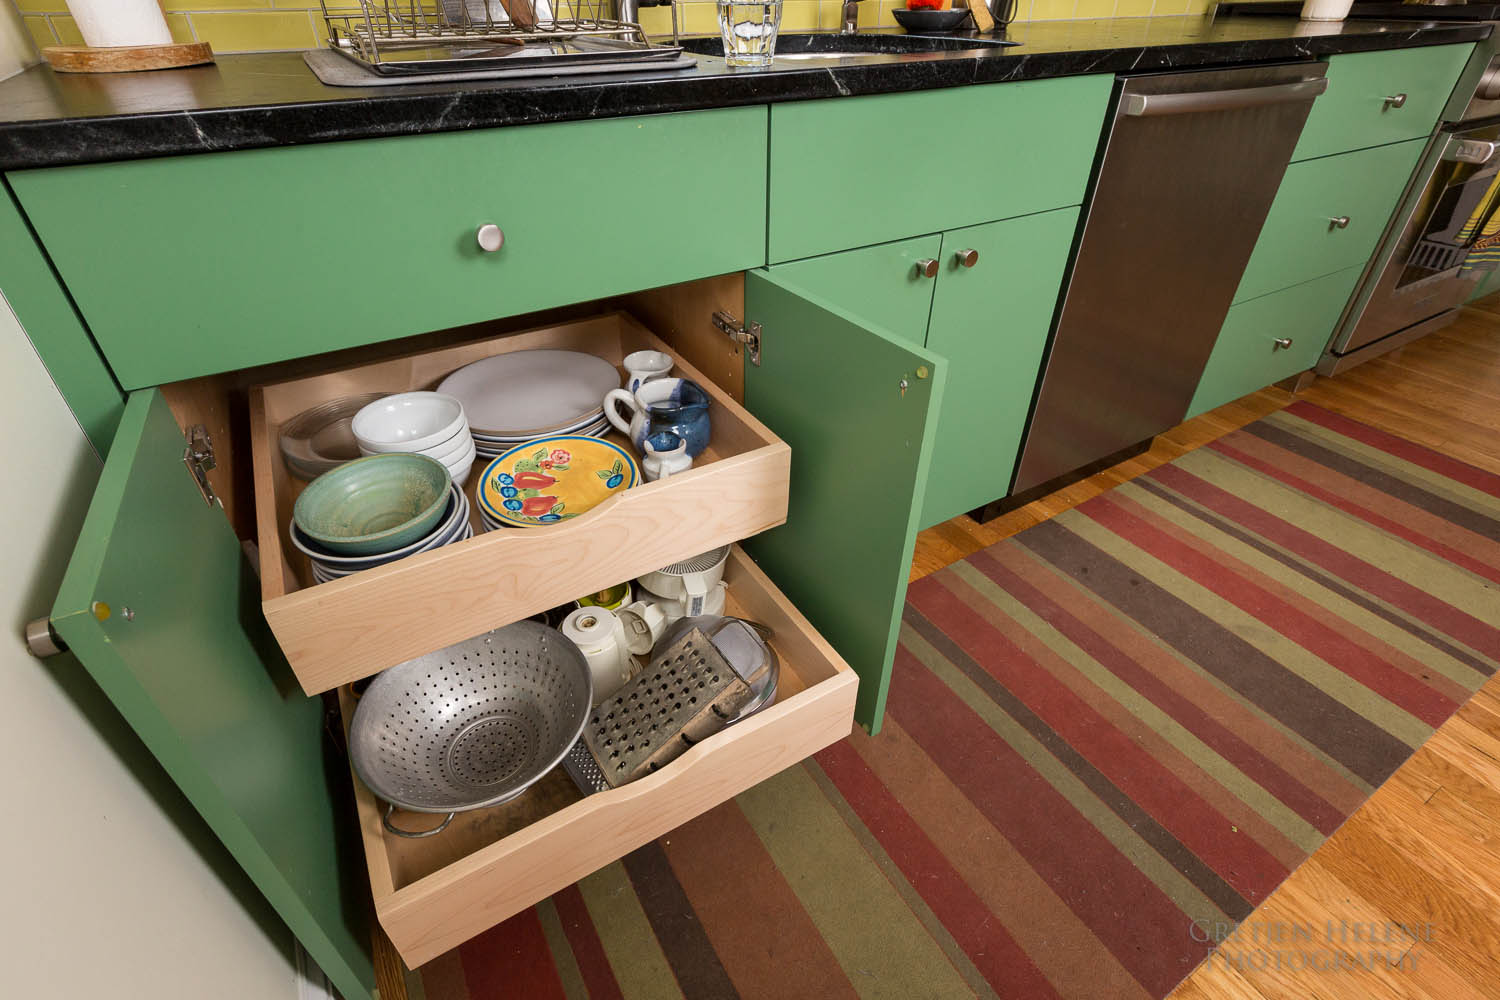 Base cabinet pullouts make access easy